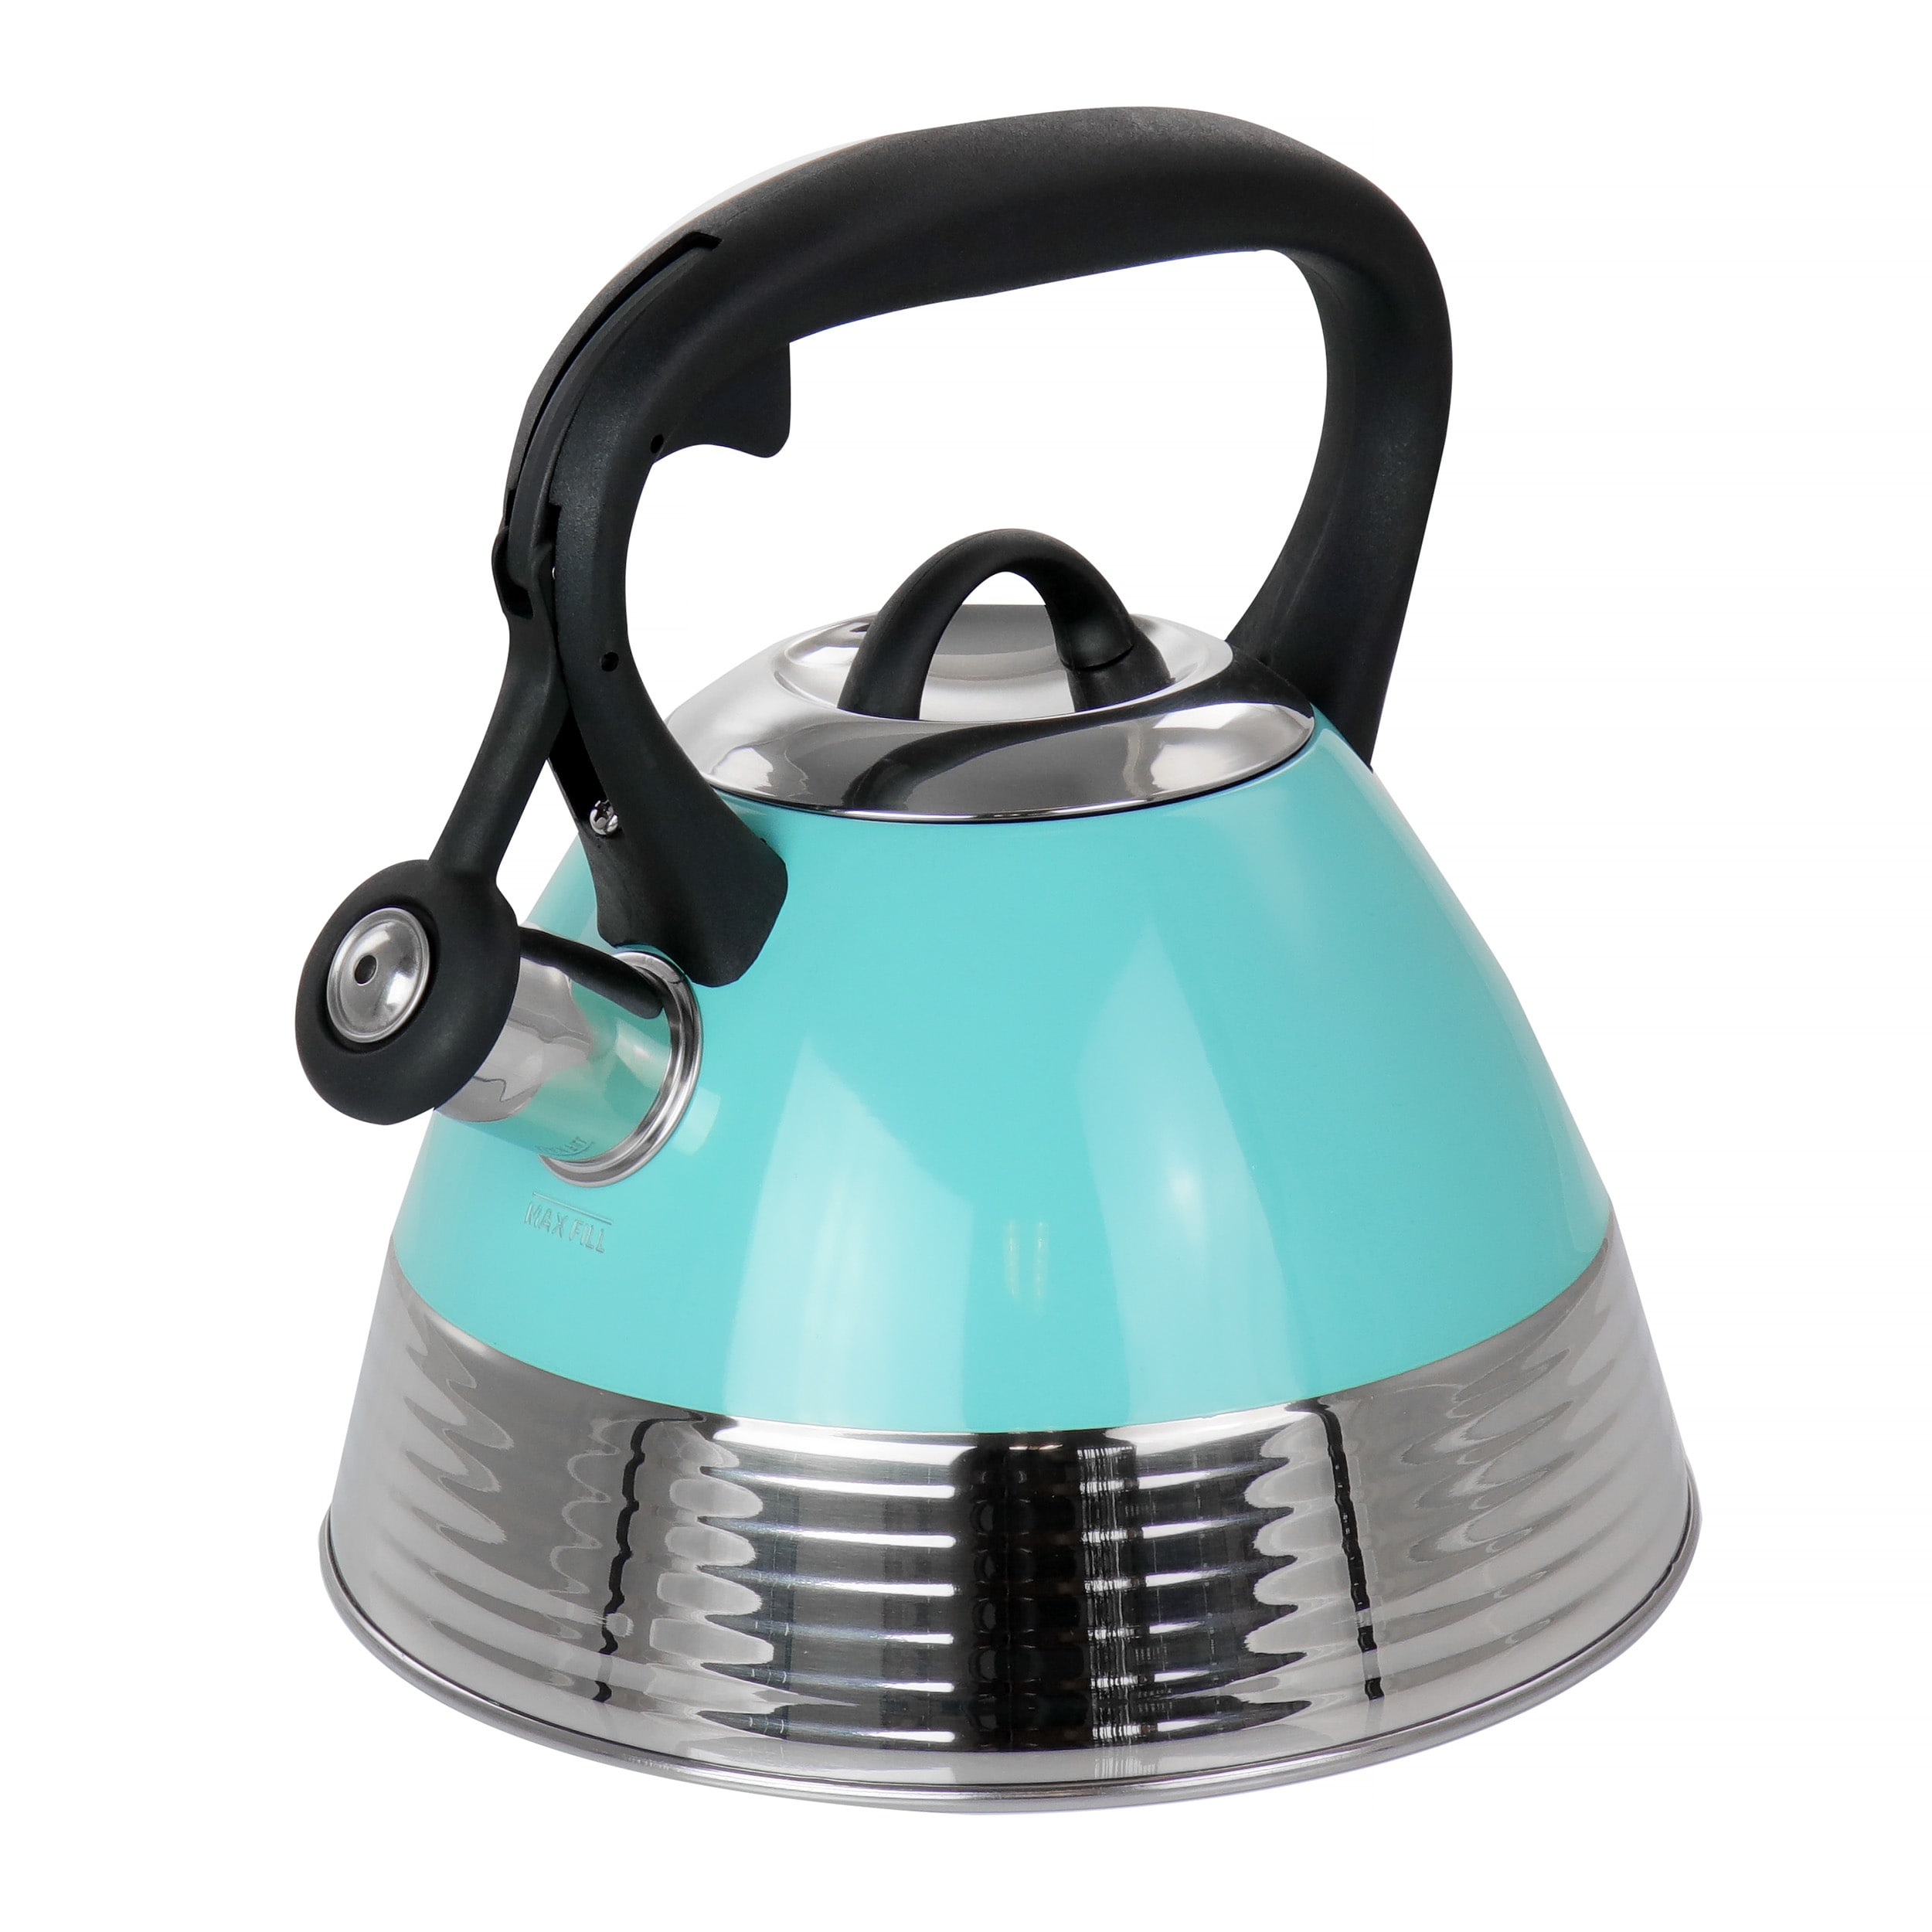 Mr. Coffee 2.5 Quart Stainless Steel Whistling Tea Kettle - Turquoise